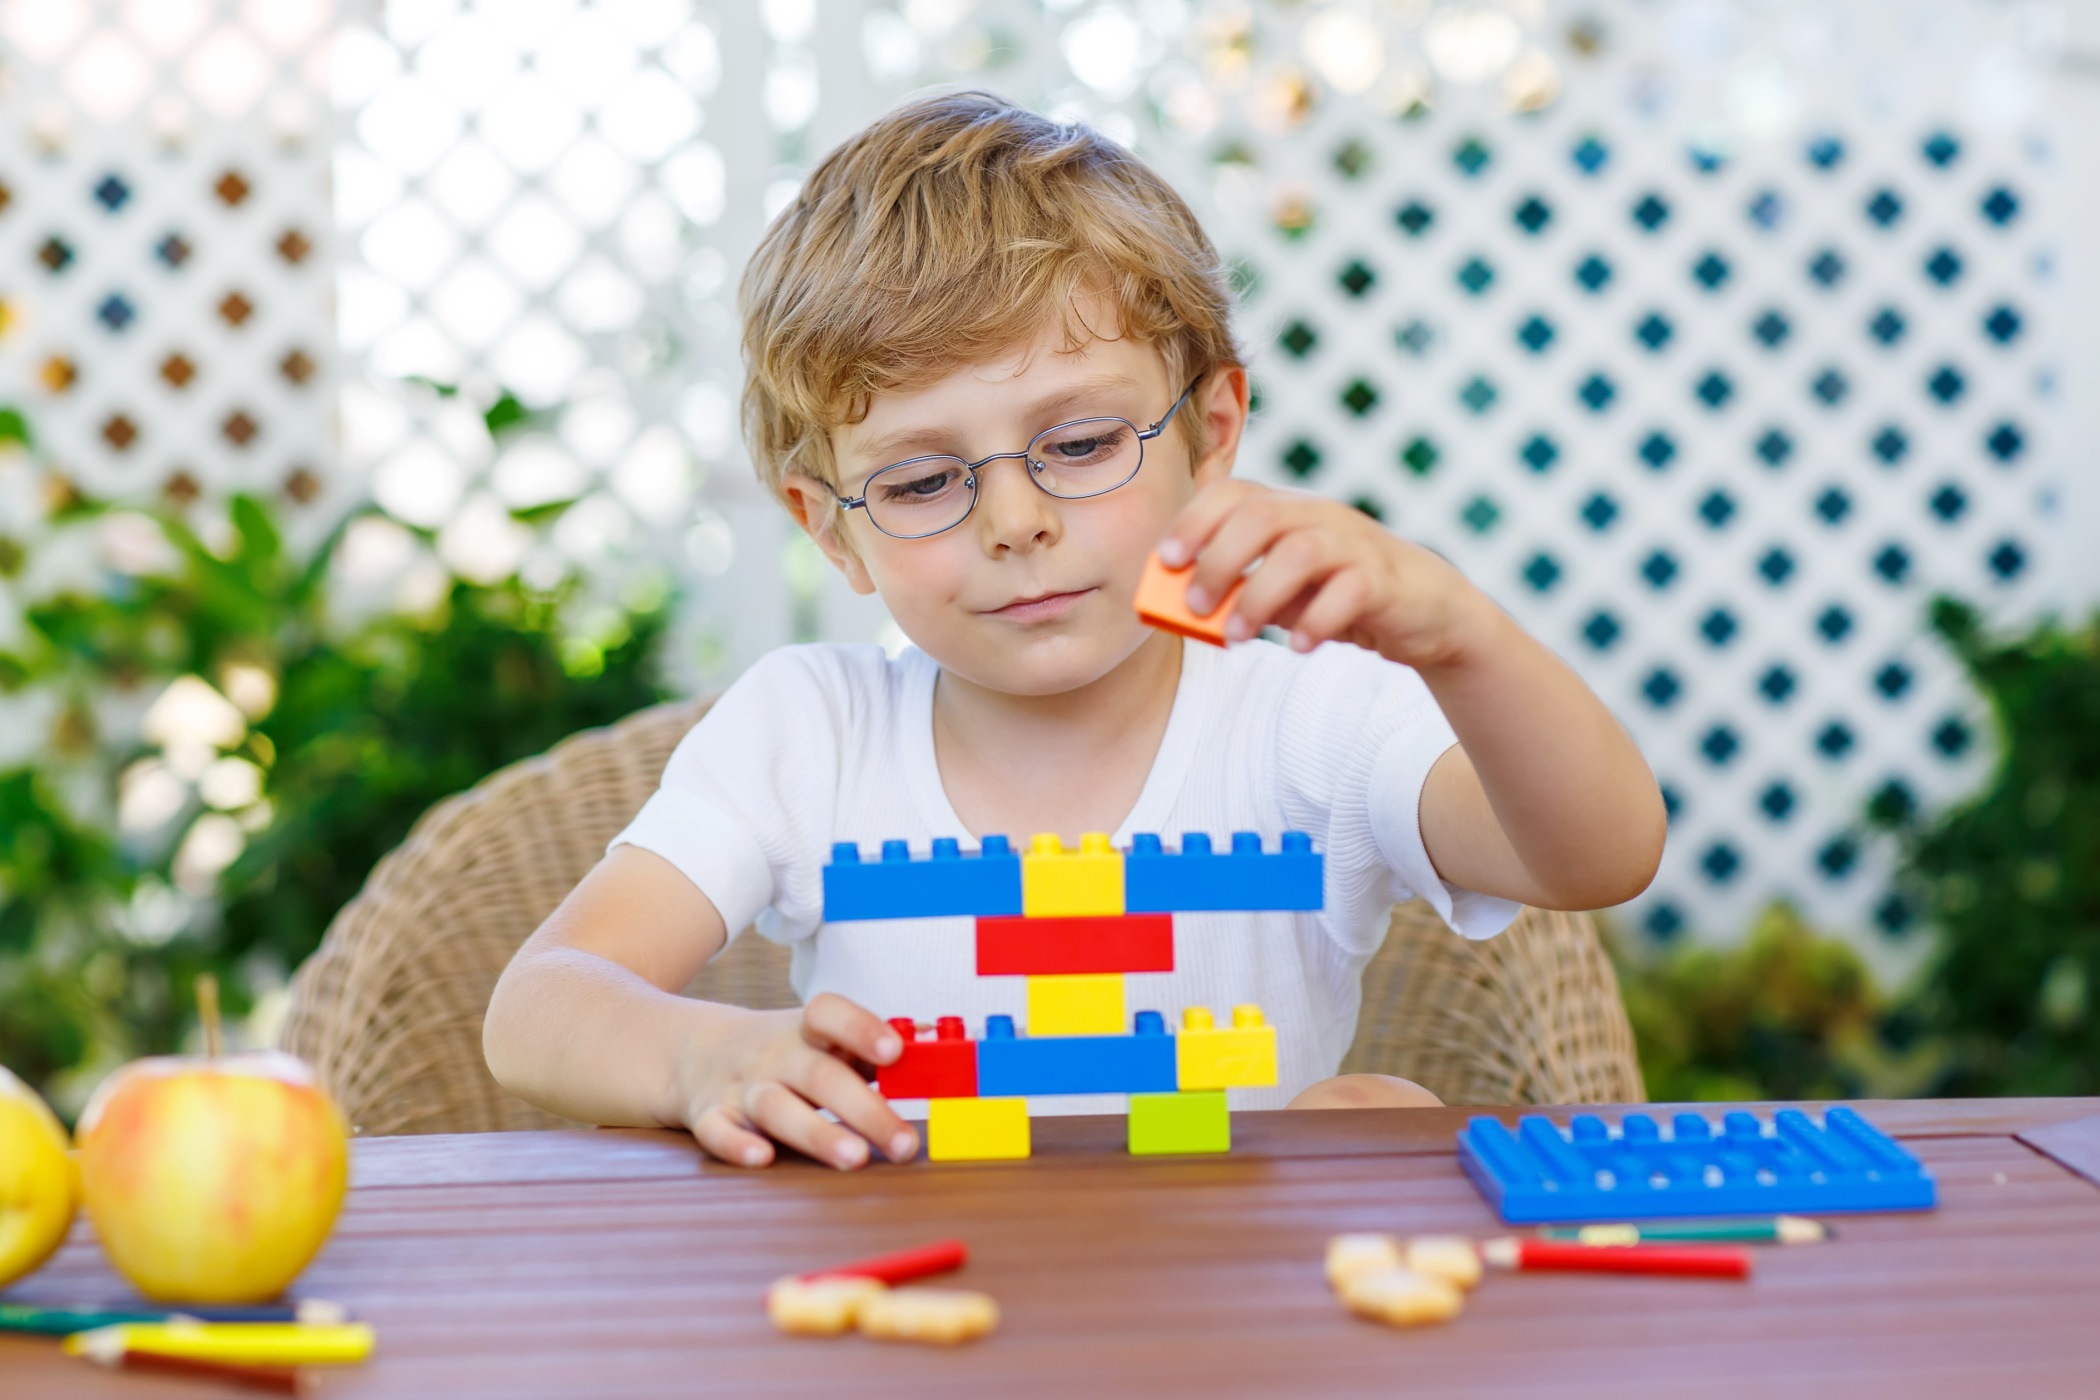 a young boy playing with legos who is 2 to 6 or 7 years old